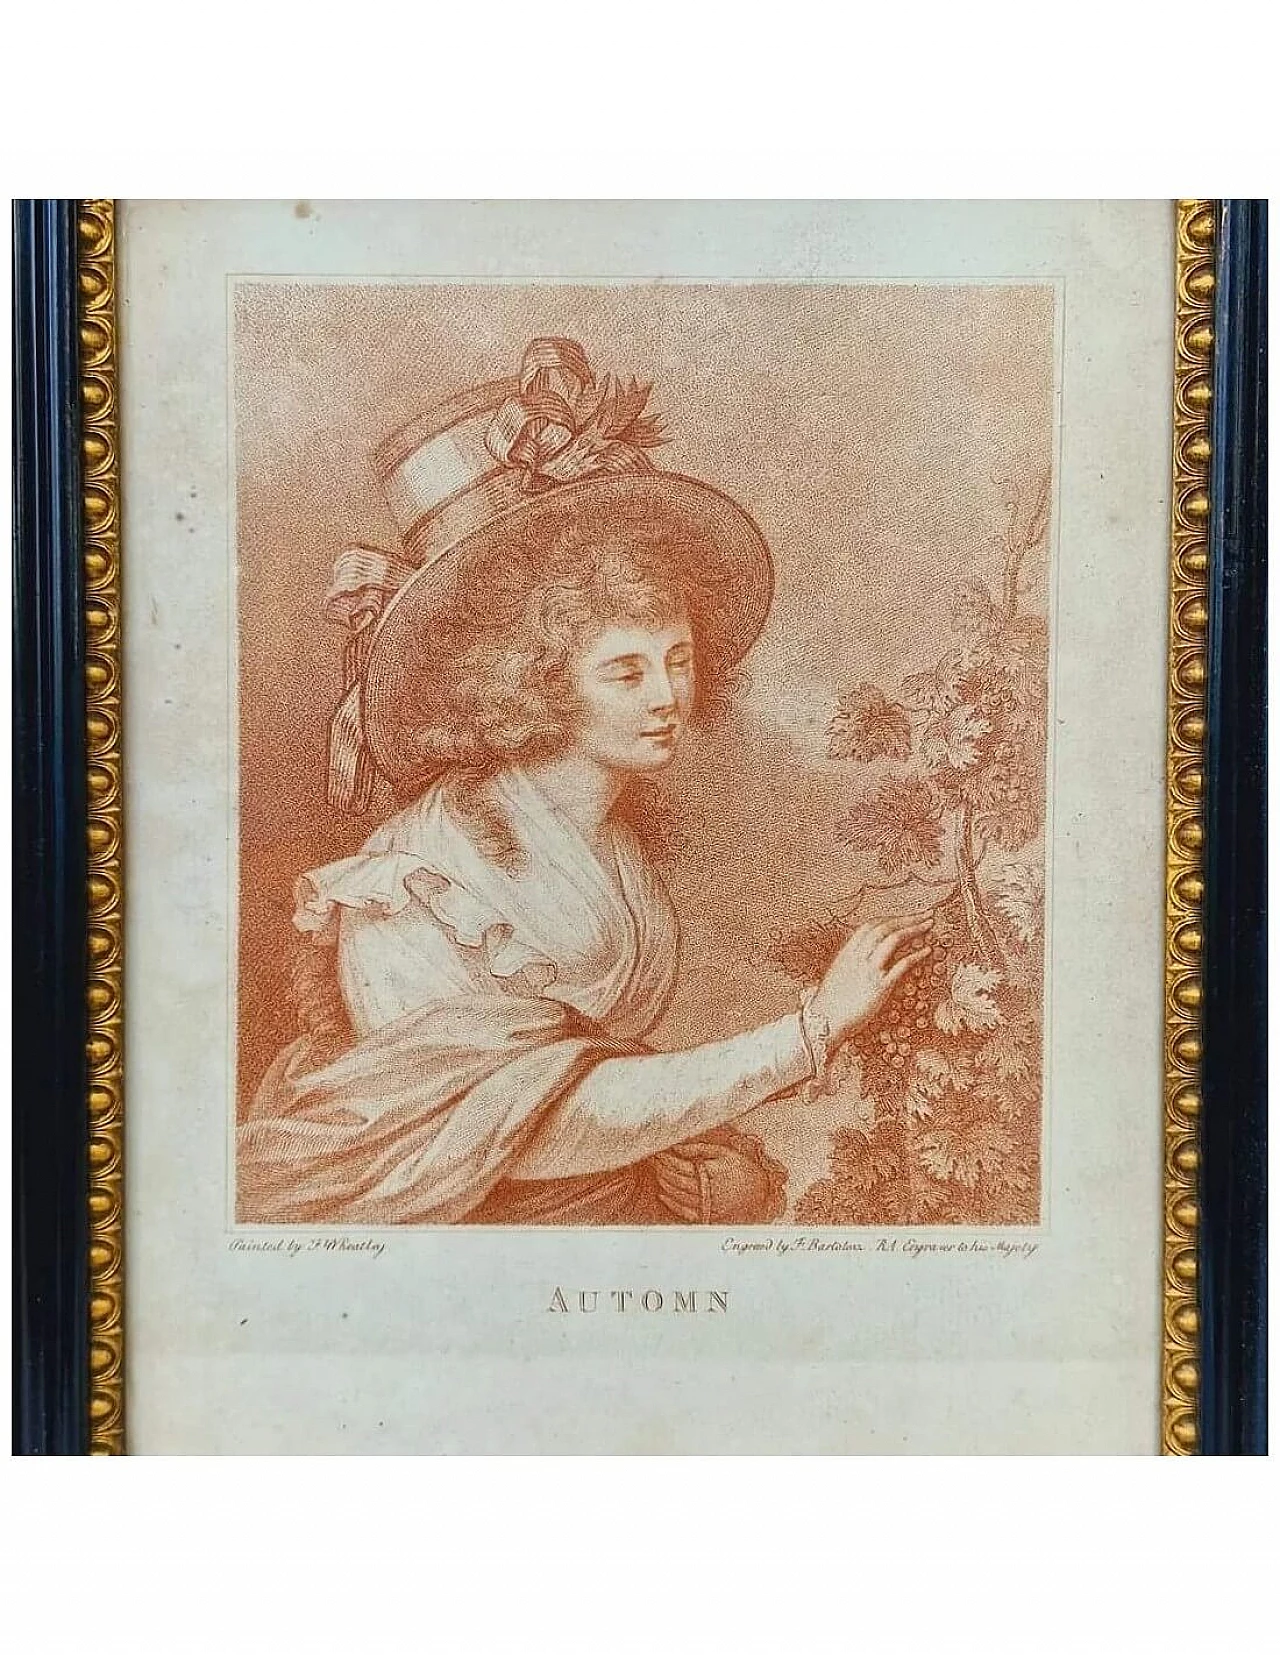 Pair of Automn and Summer sanguine etchings by Francesco Bartolozzi, 1780 1